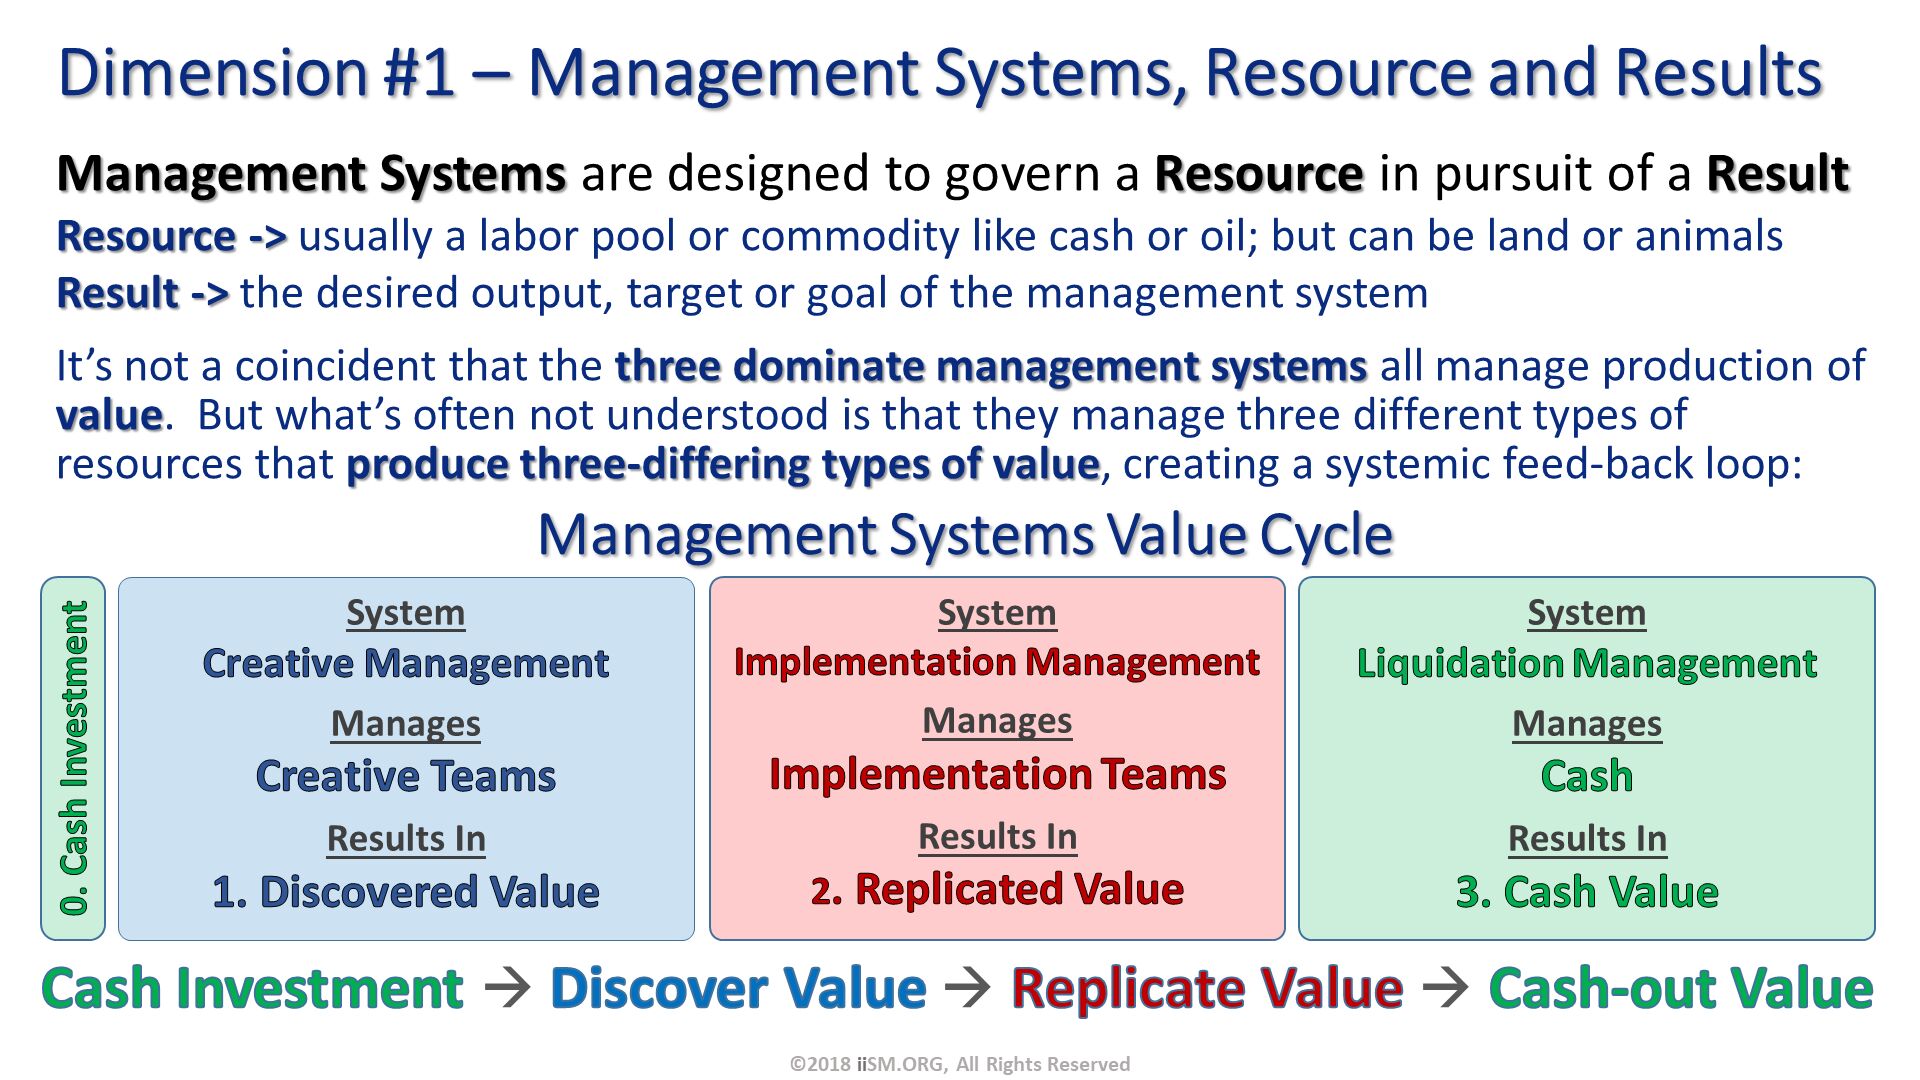 Dimension #1 – Management Systems, Resource and Results. ©2018 iiSM.ORG, All Rights Reserved. Management Systems are designed to govern a Resource in pursuit of a Result
Resource -> usually a labor pool or commodity like cash or oil; but can be land or animals
Result -> the desired output, target or goal of the management system
It’s not a coincident that the three dominate management systems all manage production of value.  But what’s often not understood is that they manage three different types of resources that produce three-differing types of value, creating a systemic feed-back loop:. Cash Investment  Discover Value  Replicate Value  Cash-out Value. Management Systems Value Cycle. 